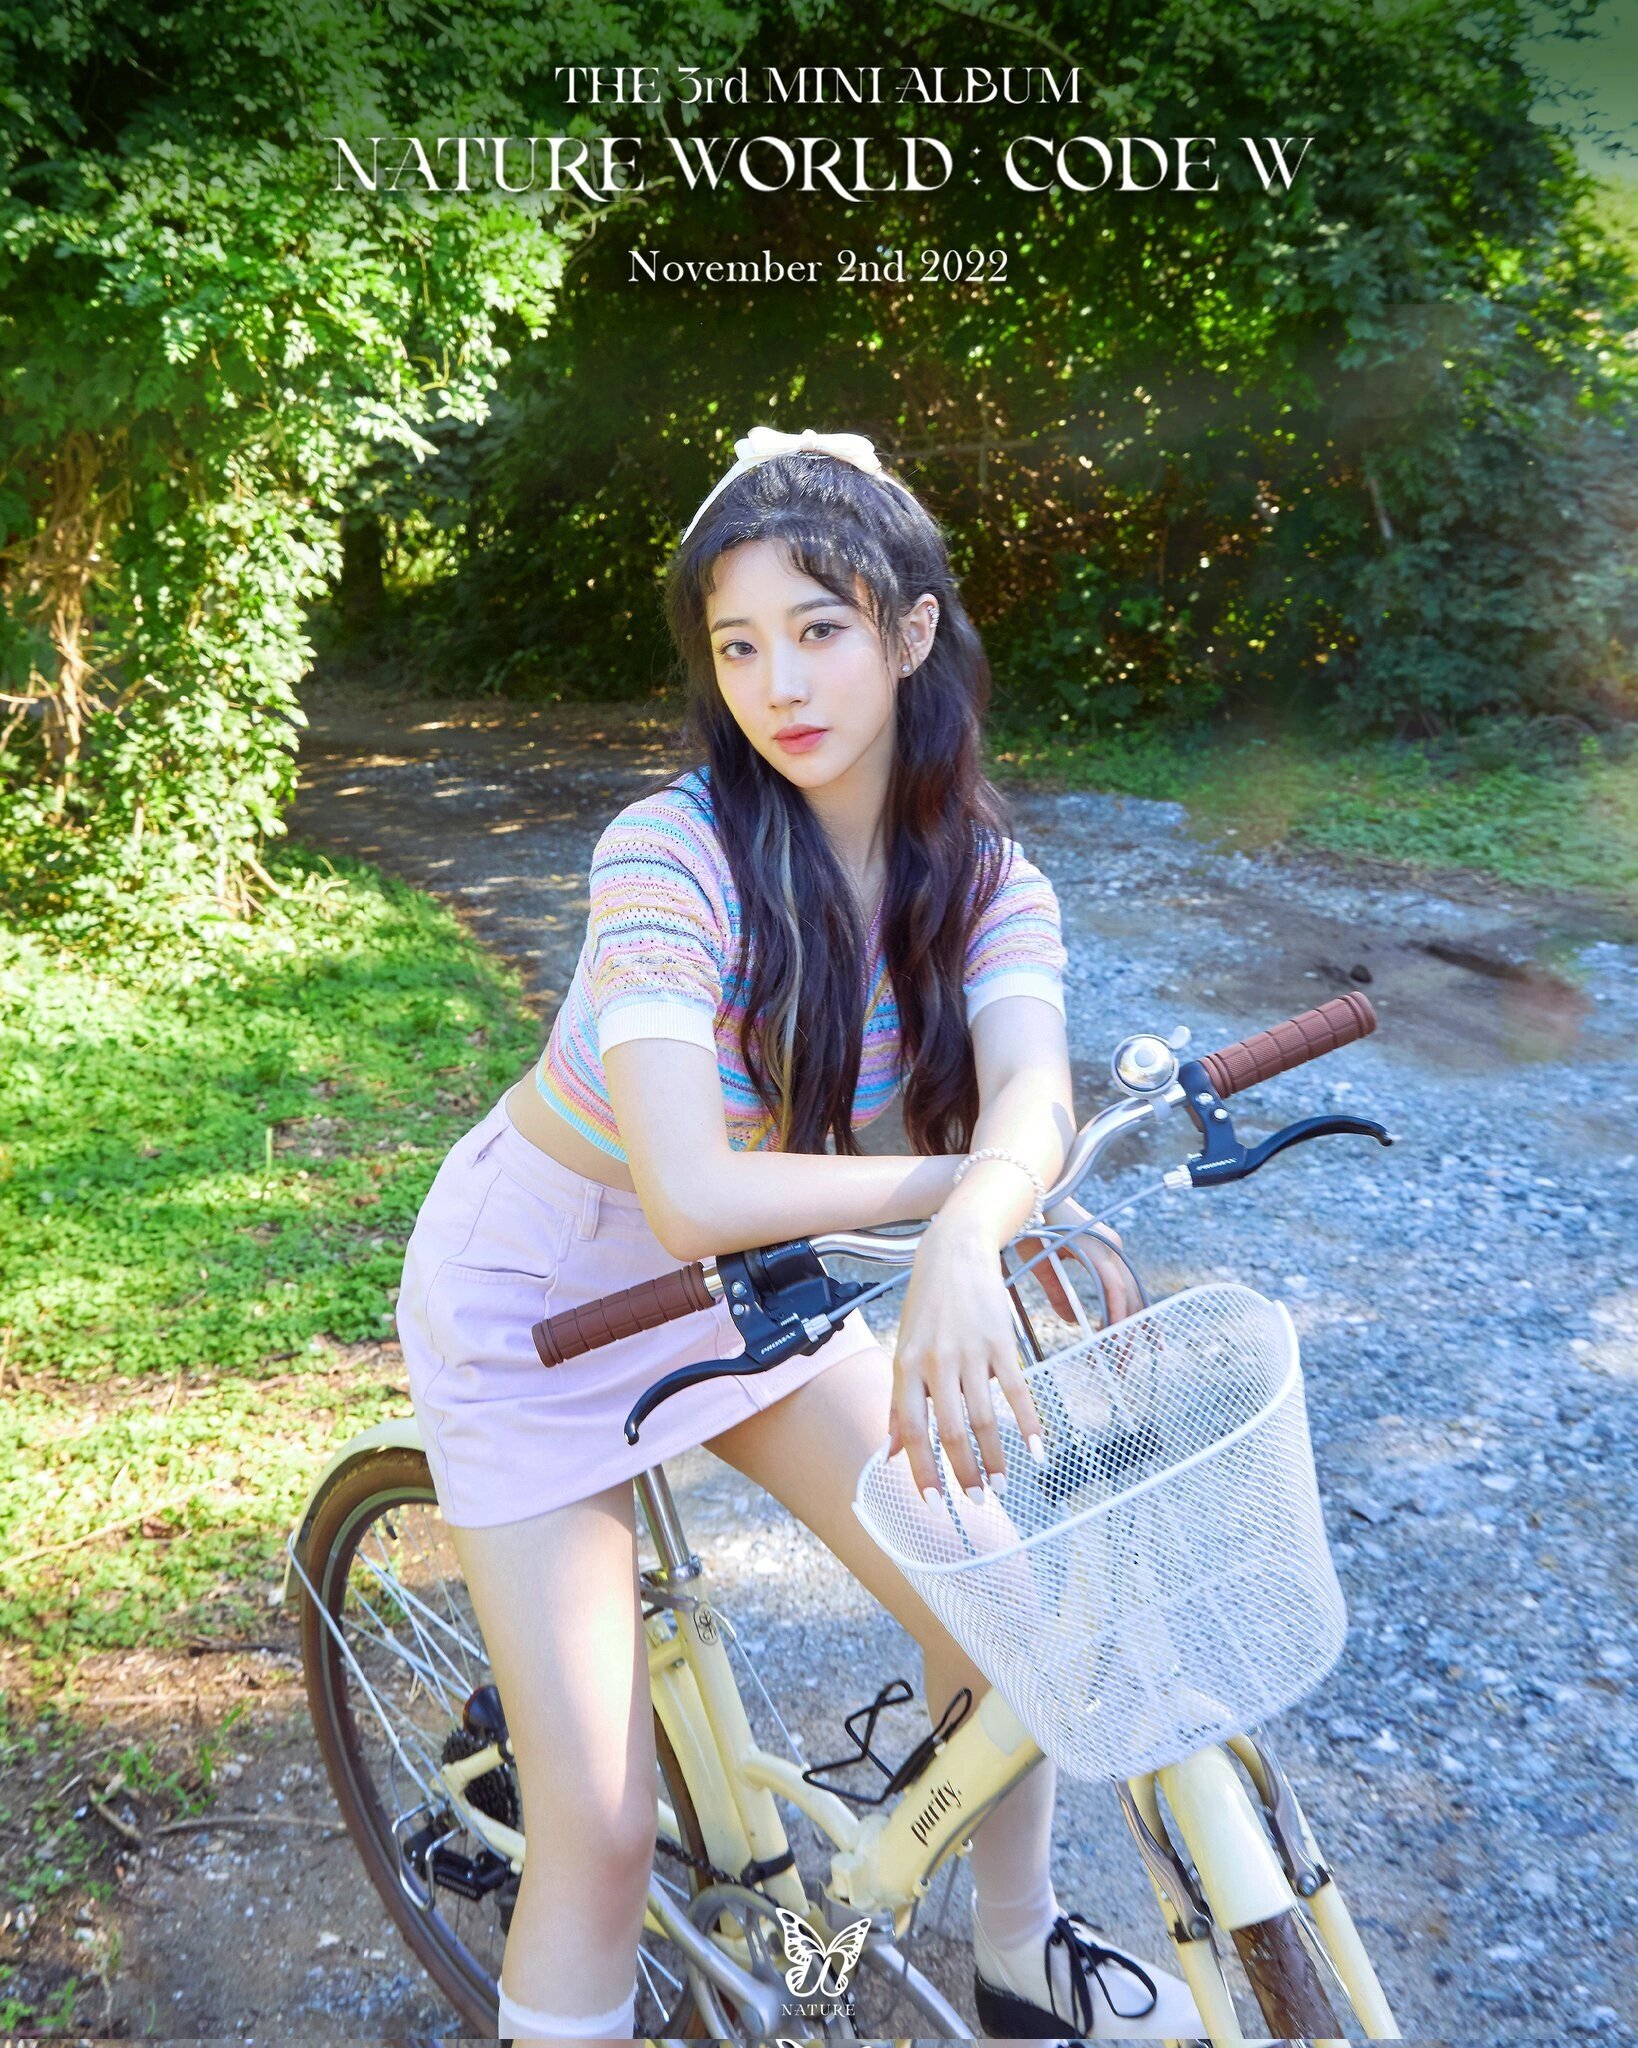 NATURE - NATURE World Code W 3rd Mini Album teasers | kpopping